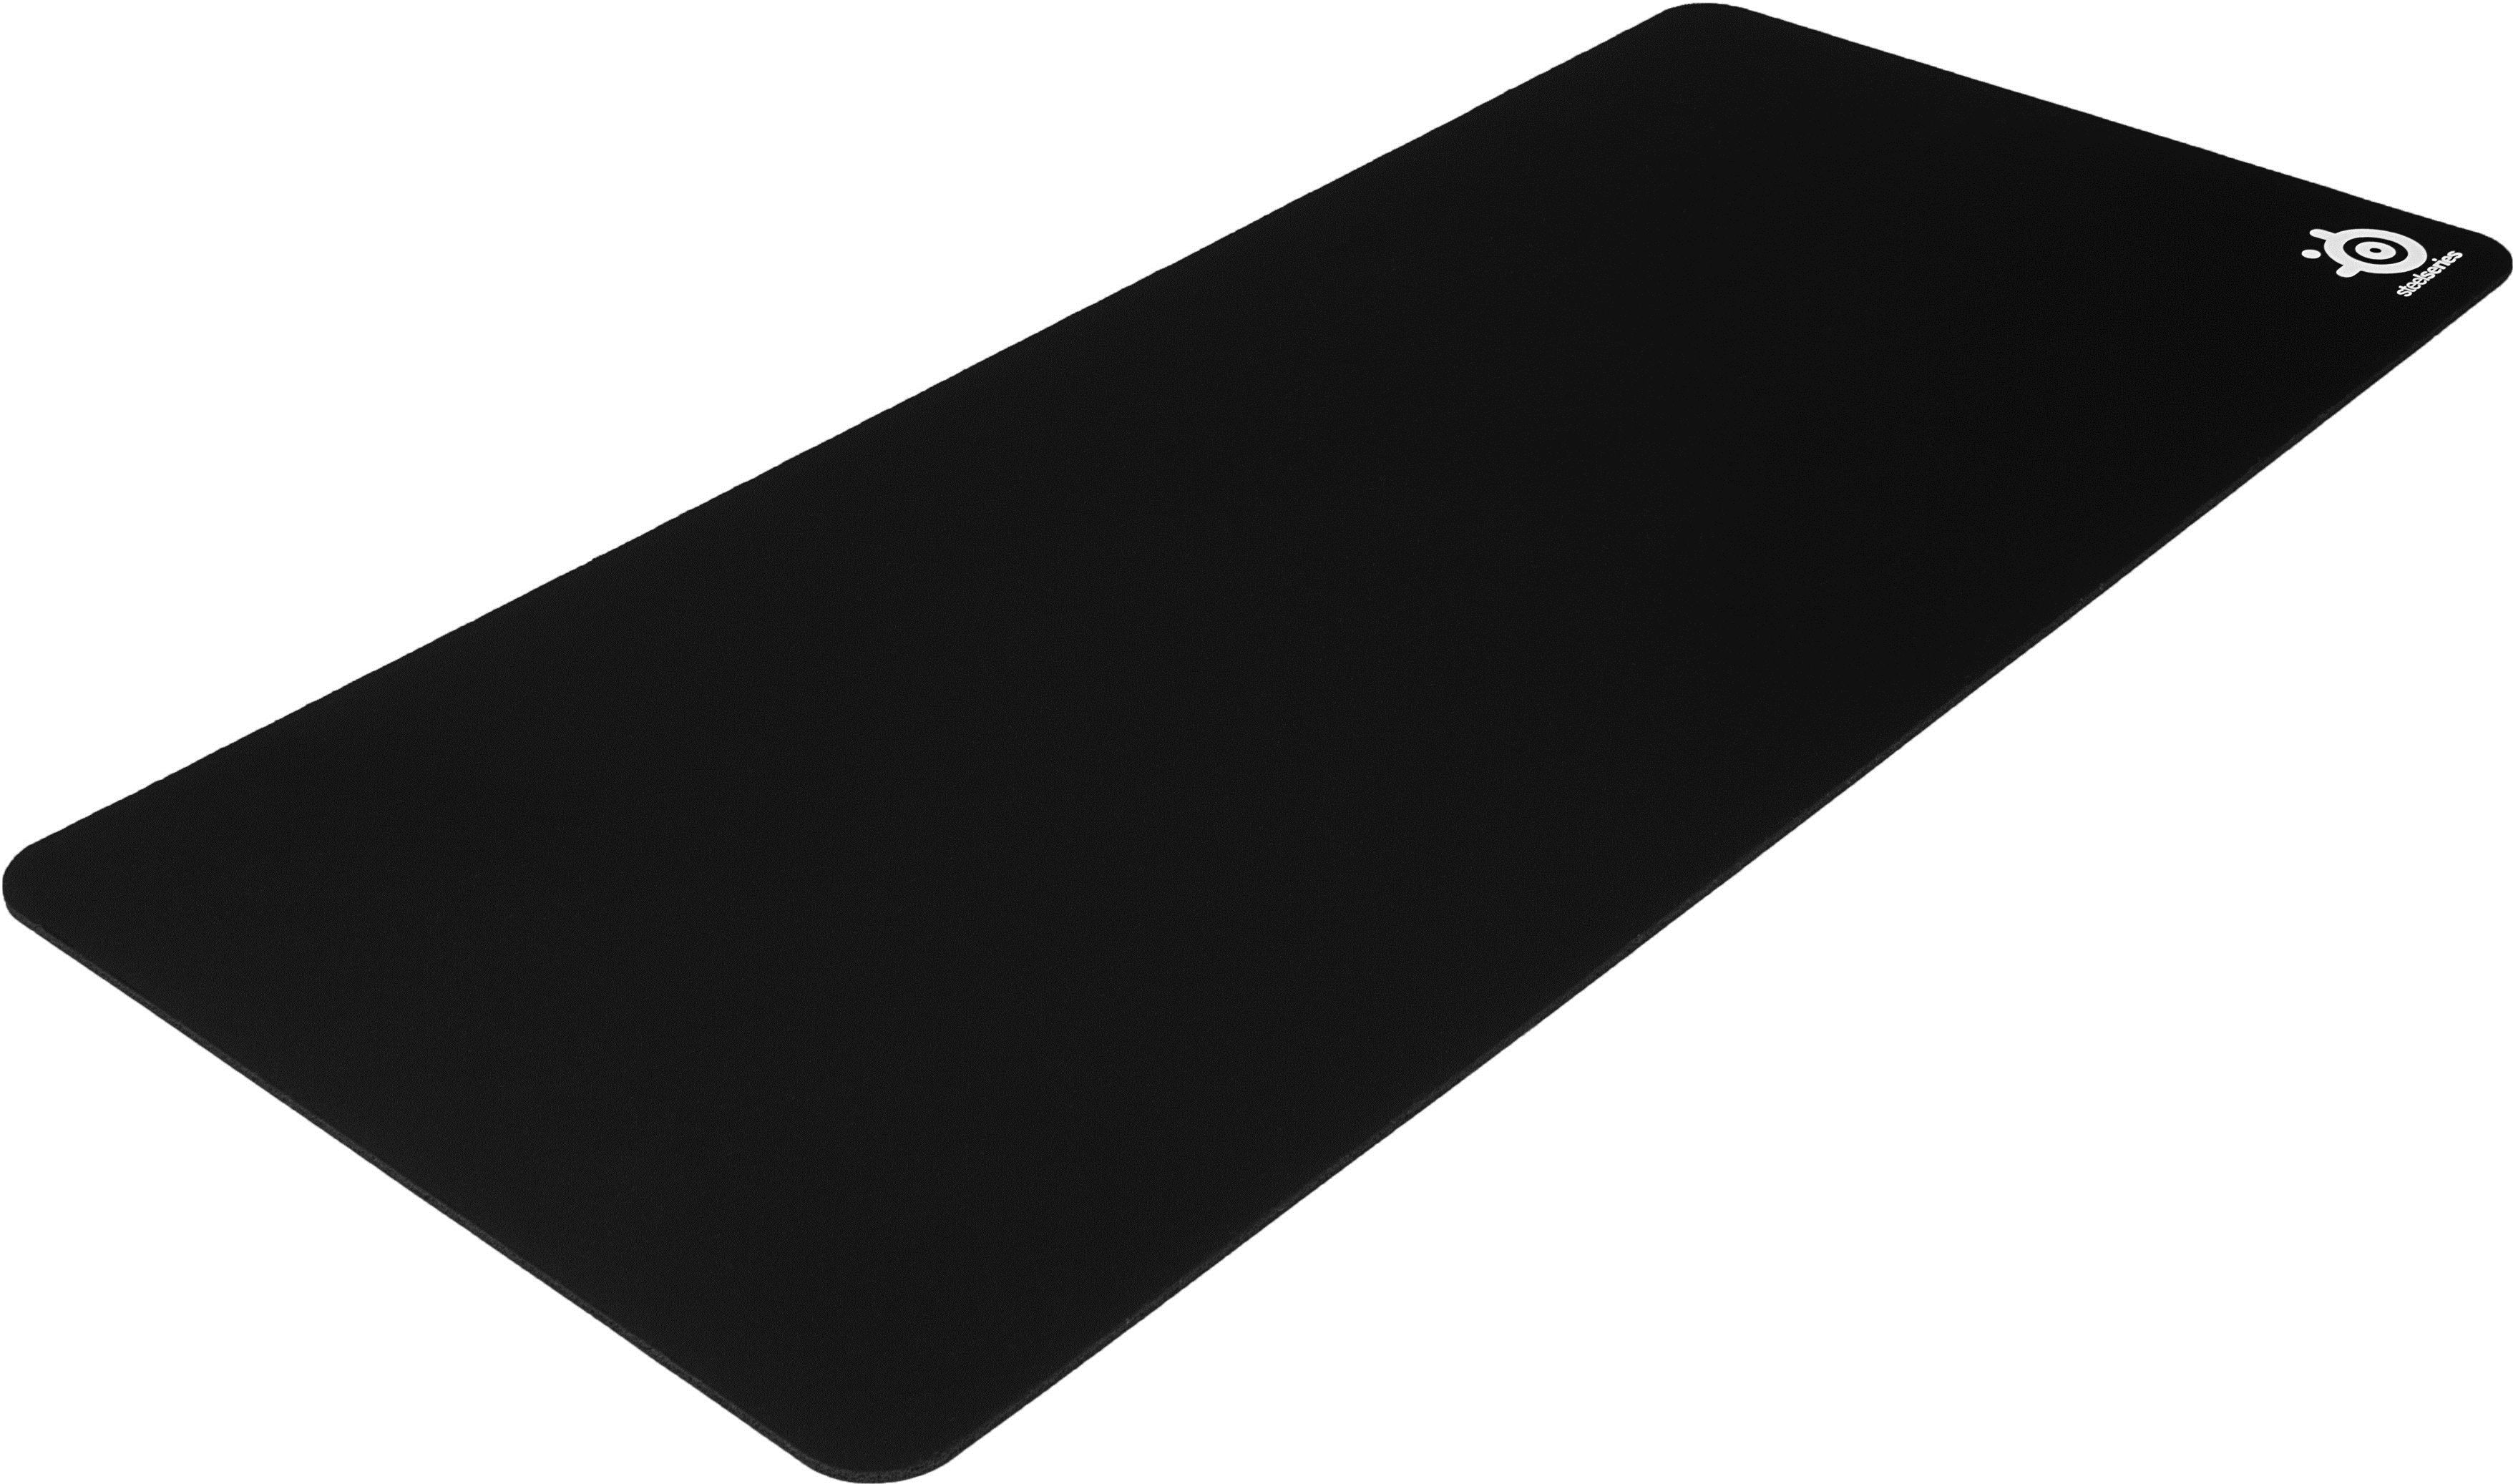 Steelseries QcK XXL Gaming Mousepad